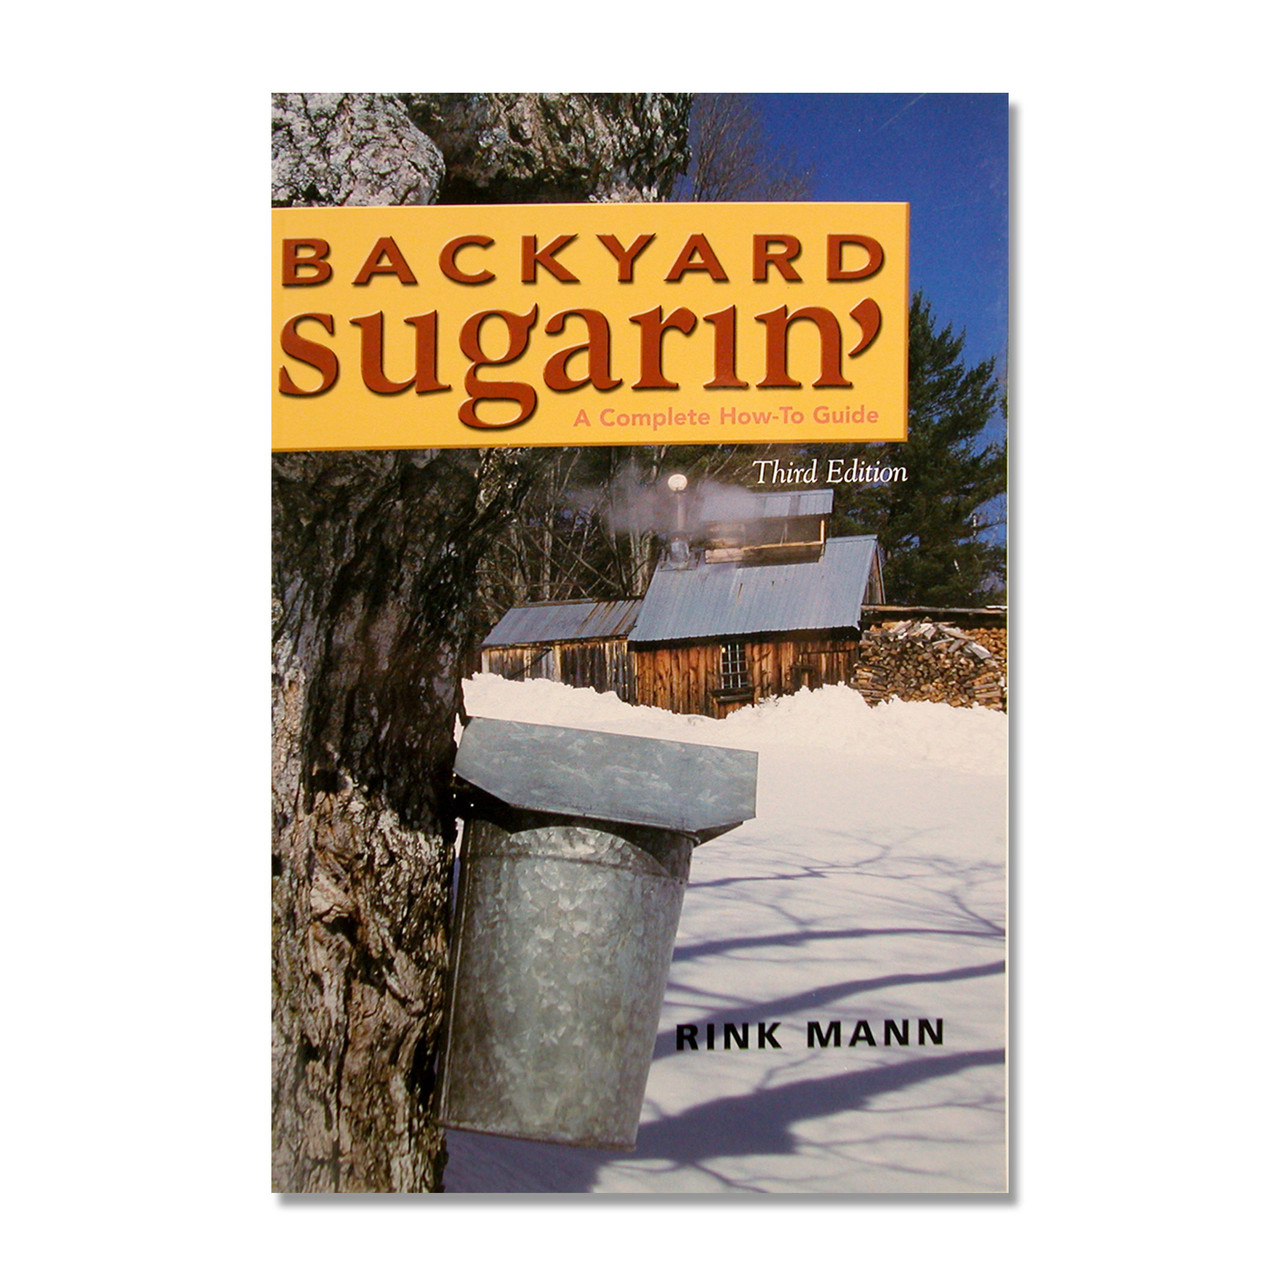 Backyard Sugarin' A Complete How-to Guide